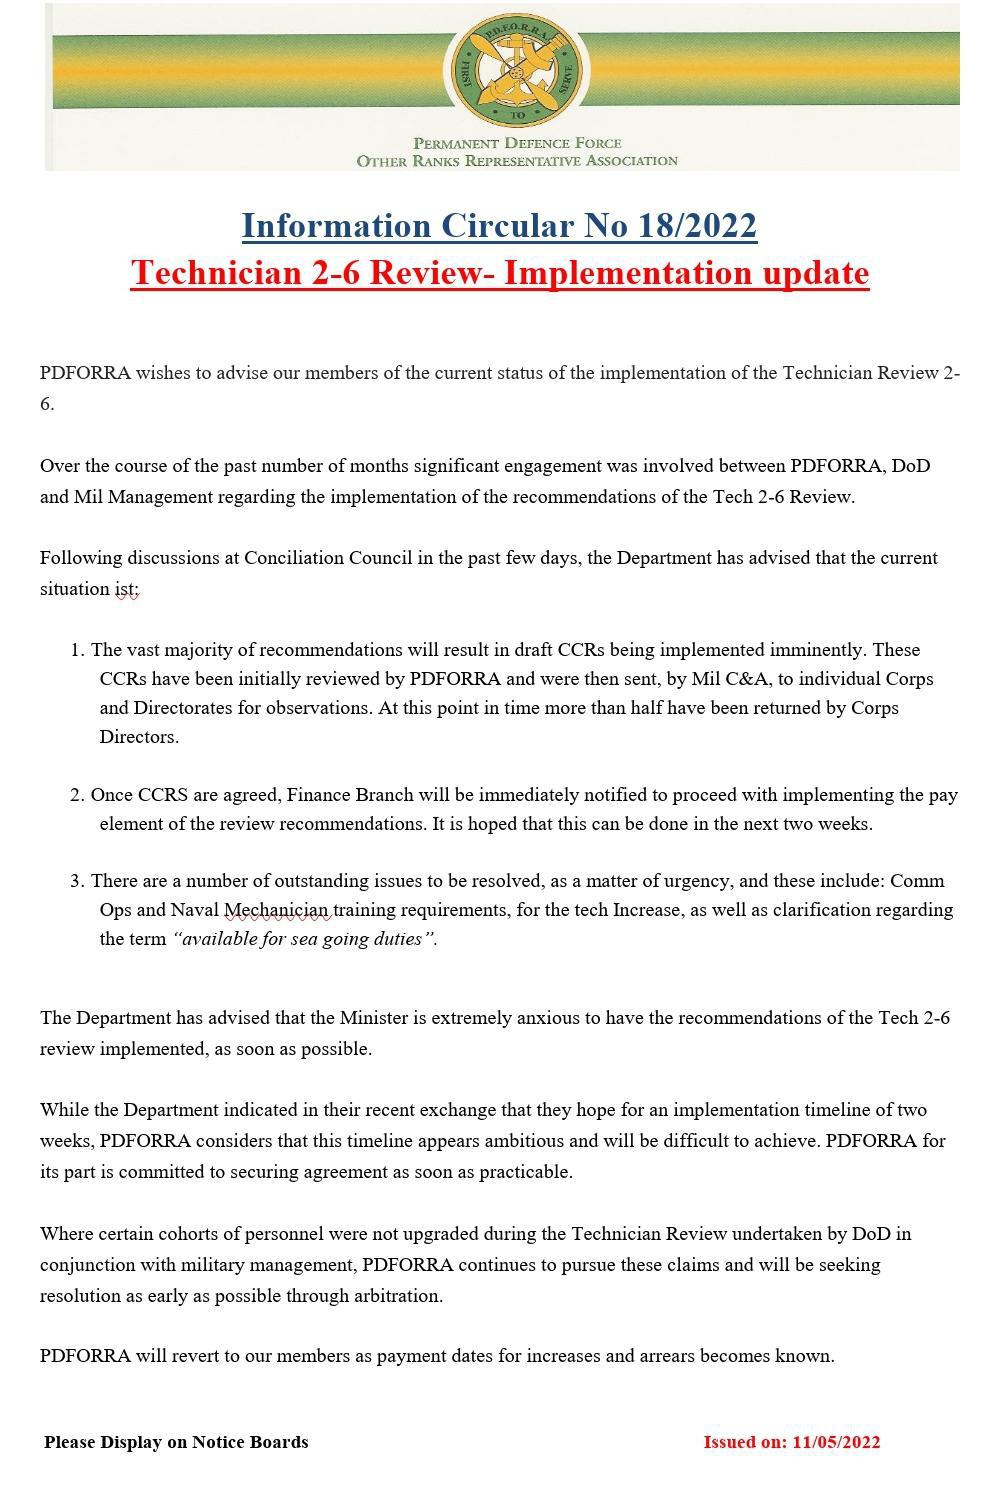 Information Circular No 18 of 22 - Technician 2 to 6 Review Implementation Update